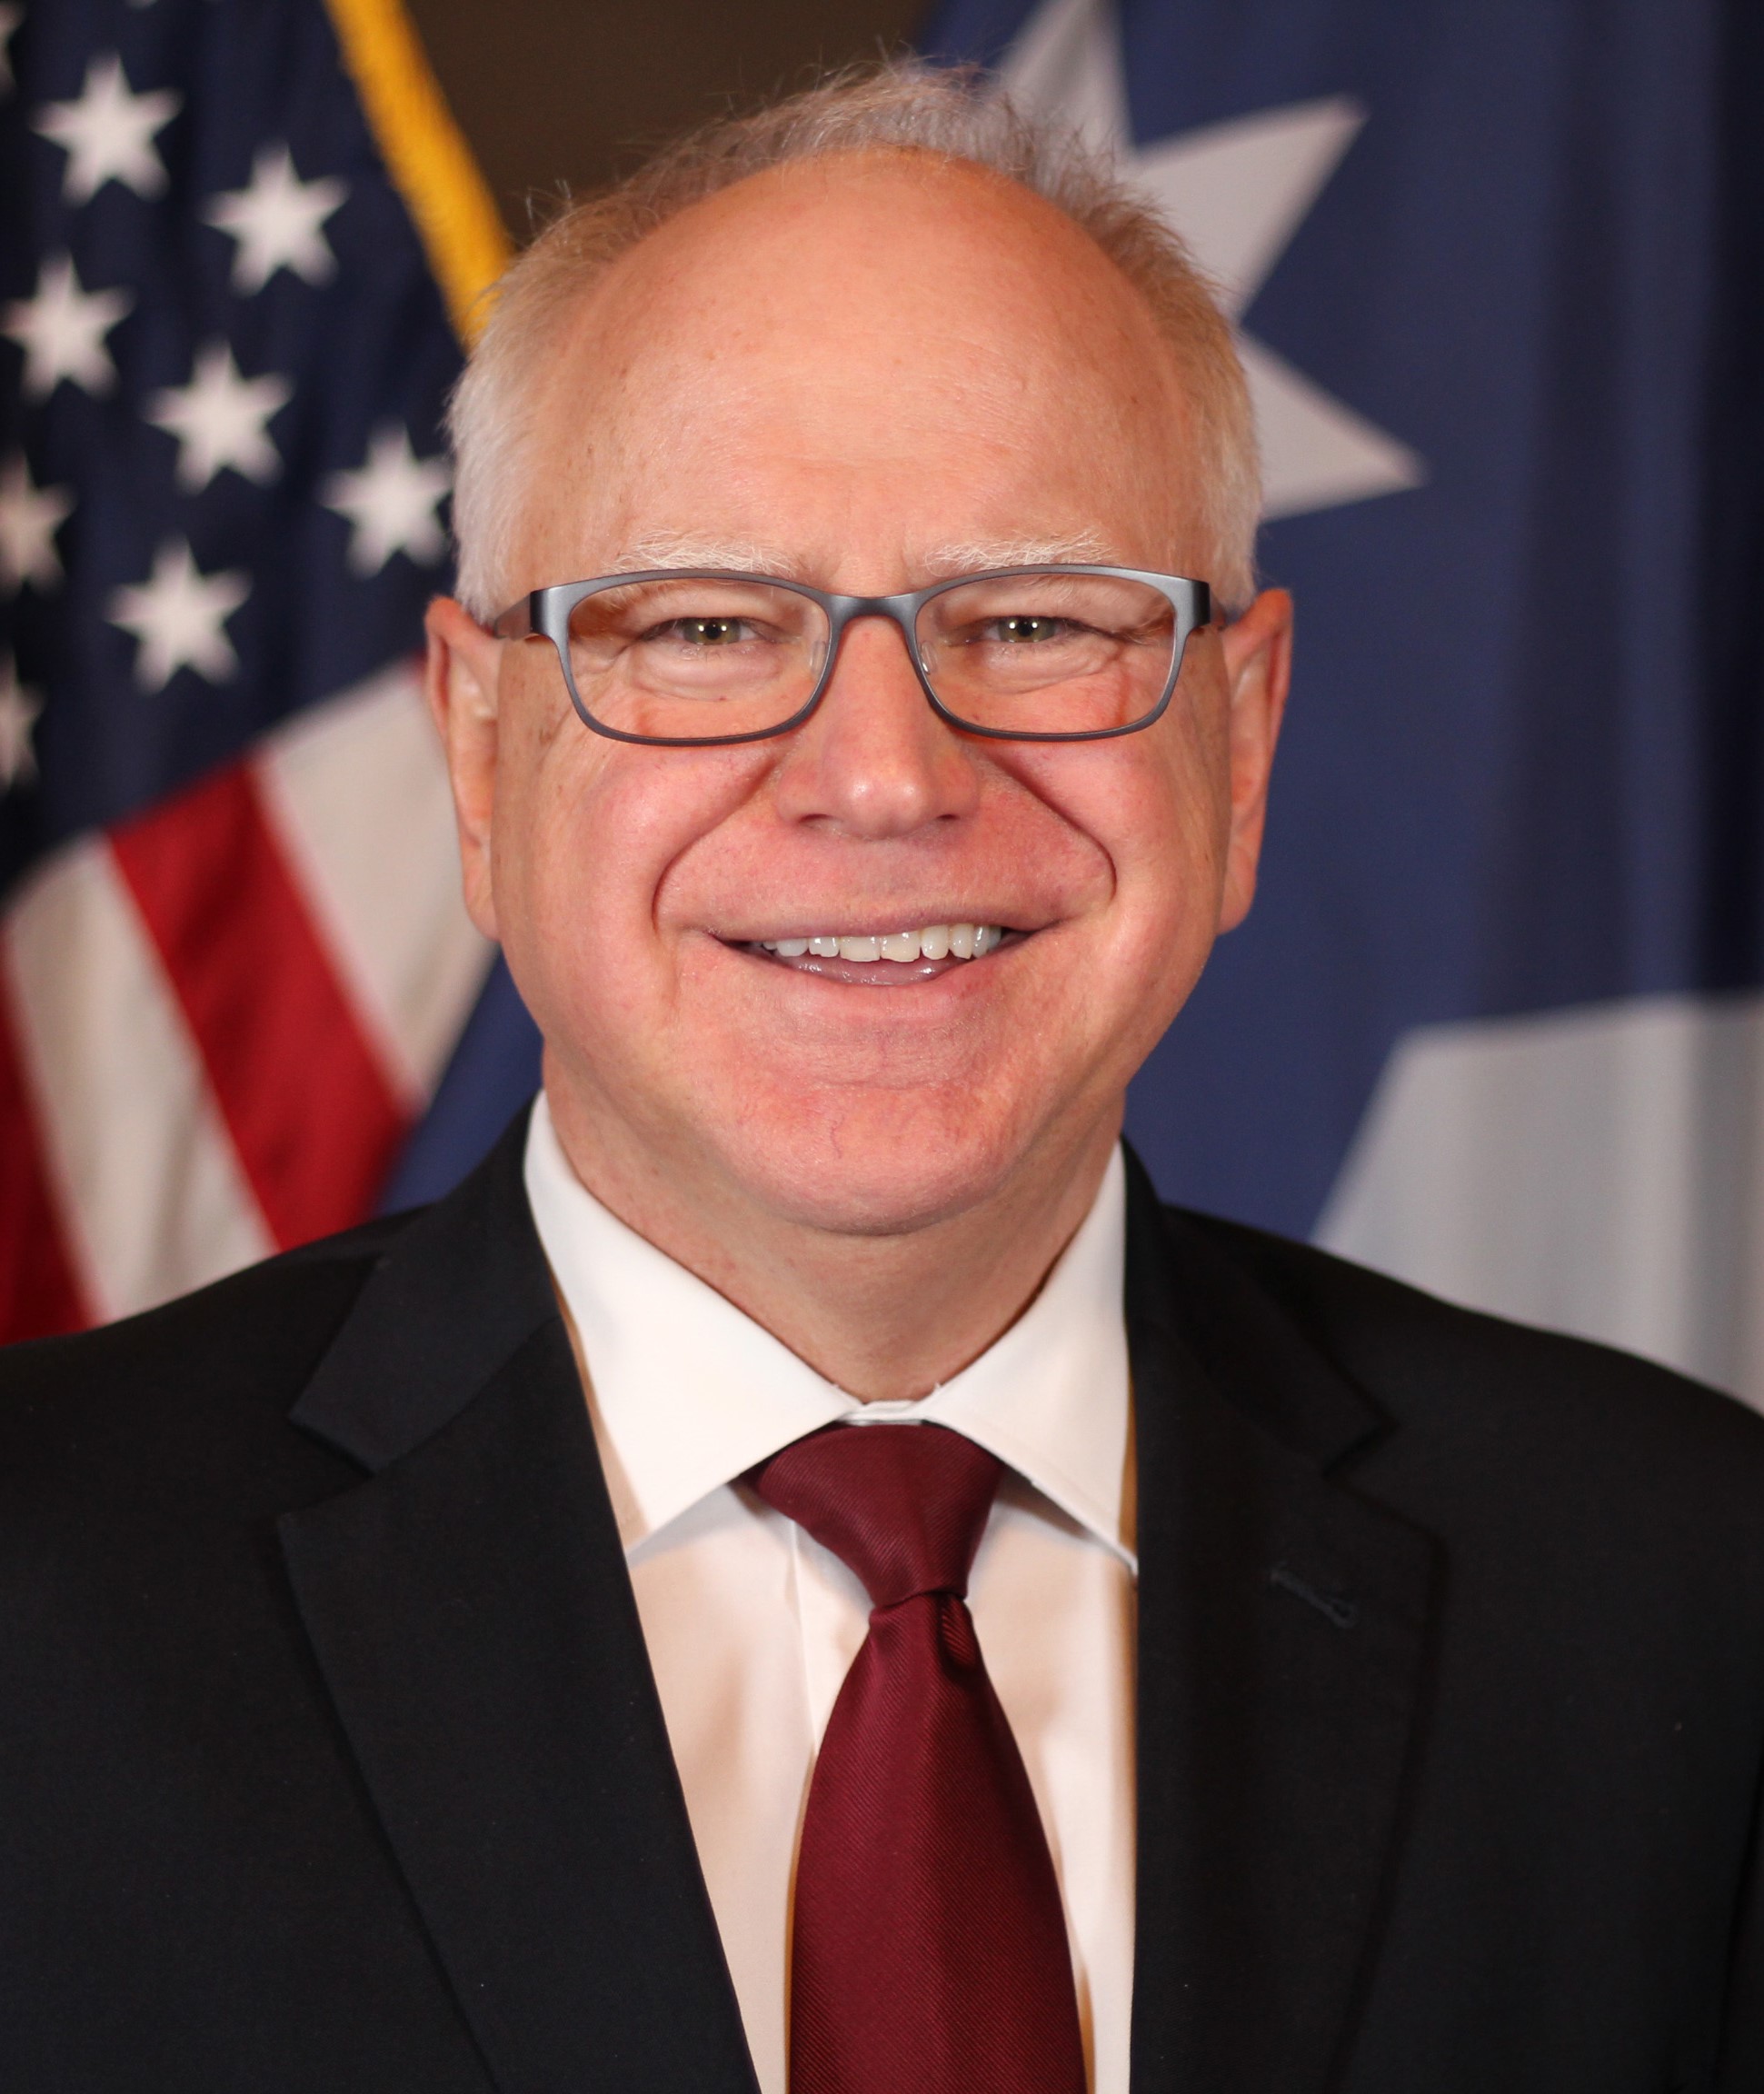 Official Photo of Governor Walz